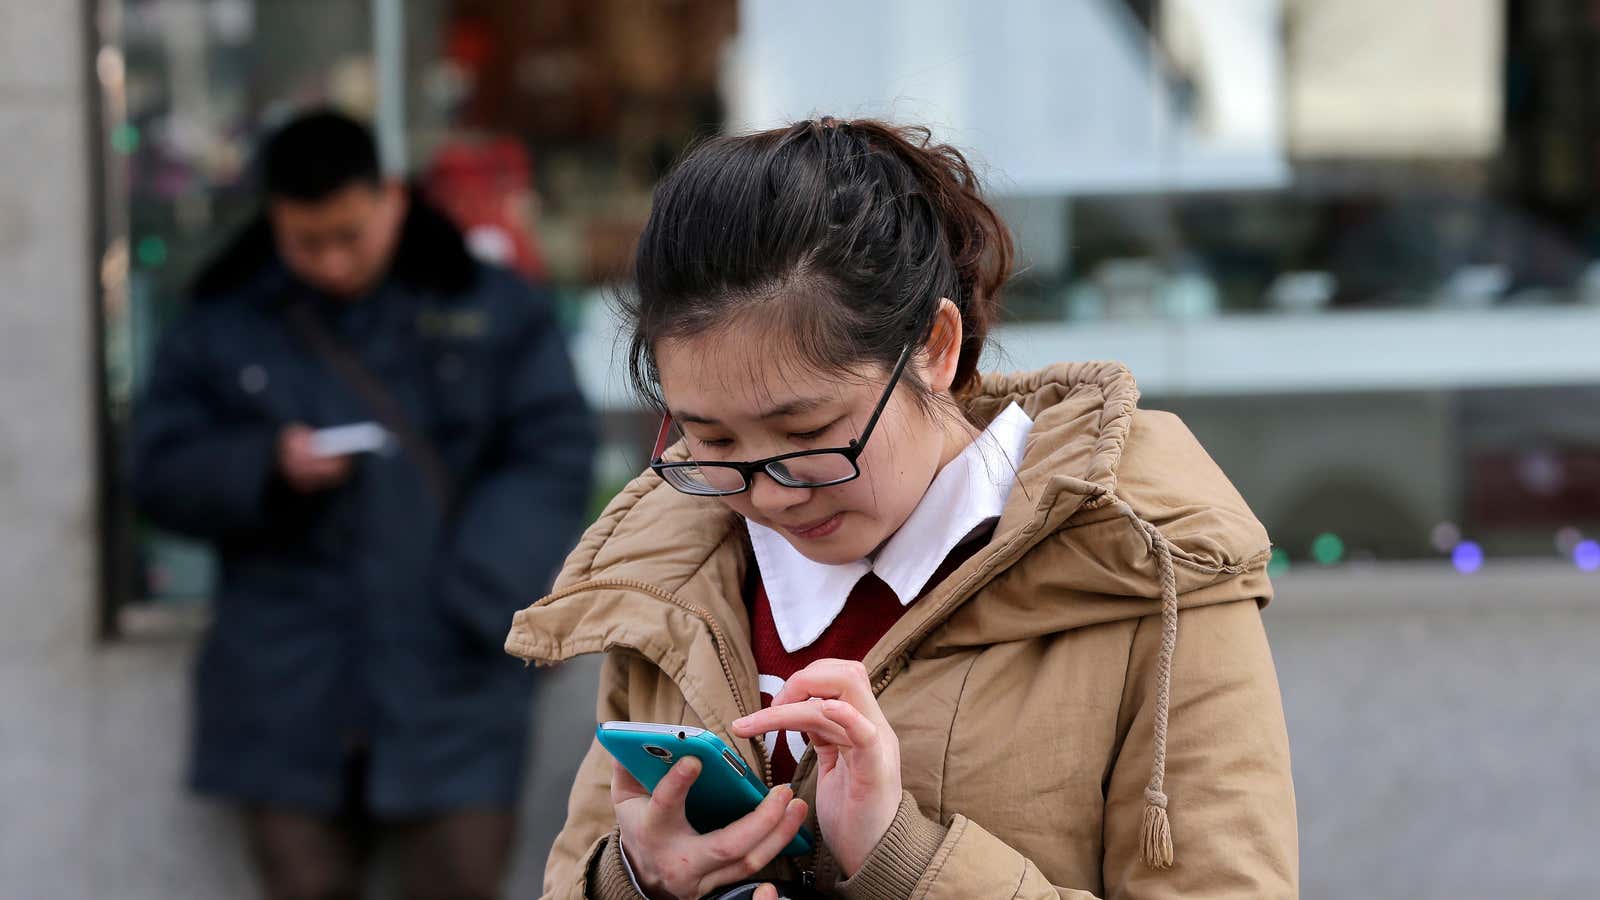 Surprise! The app market is quietly being dominated by China